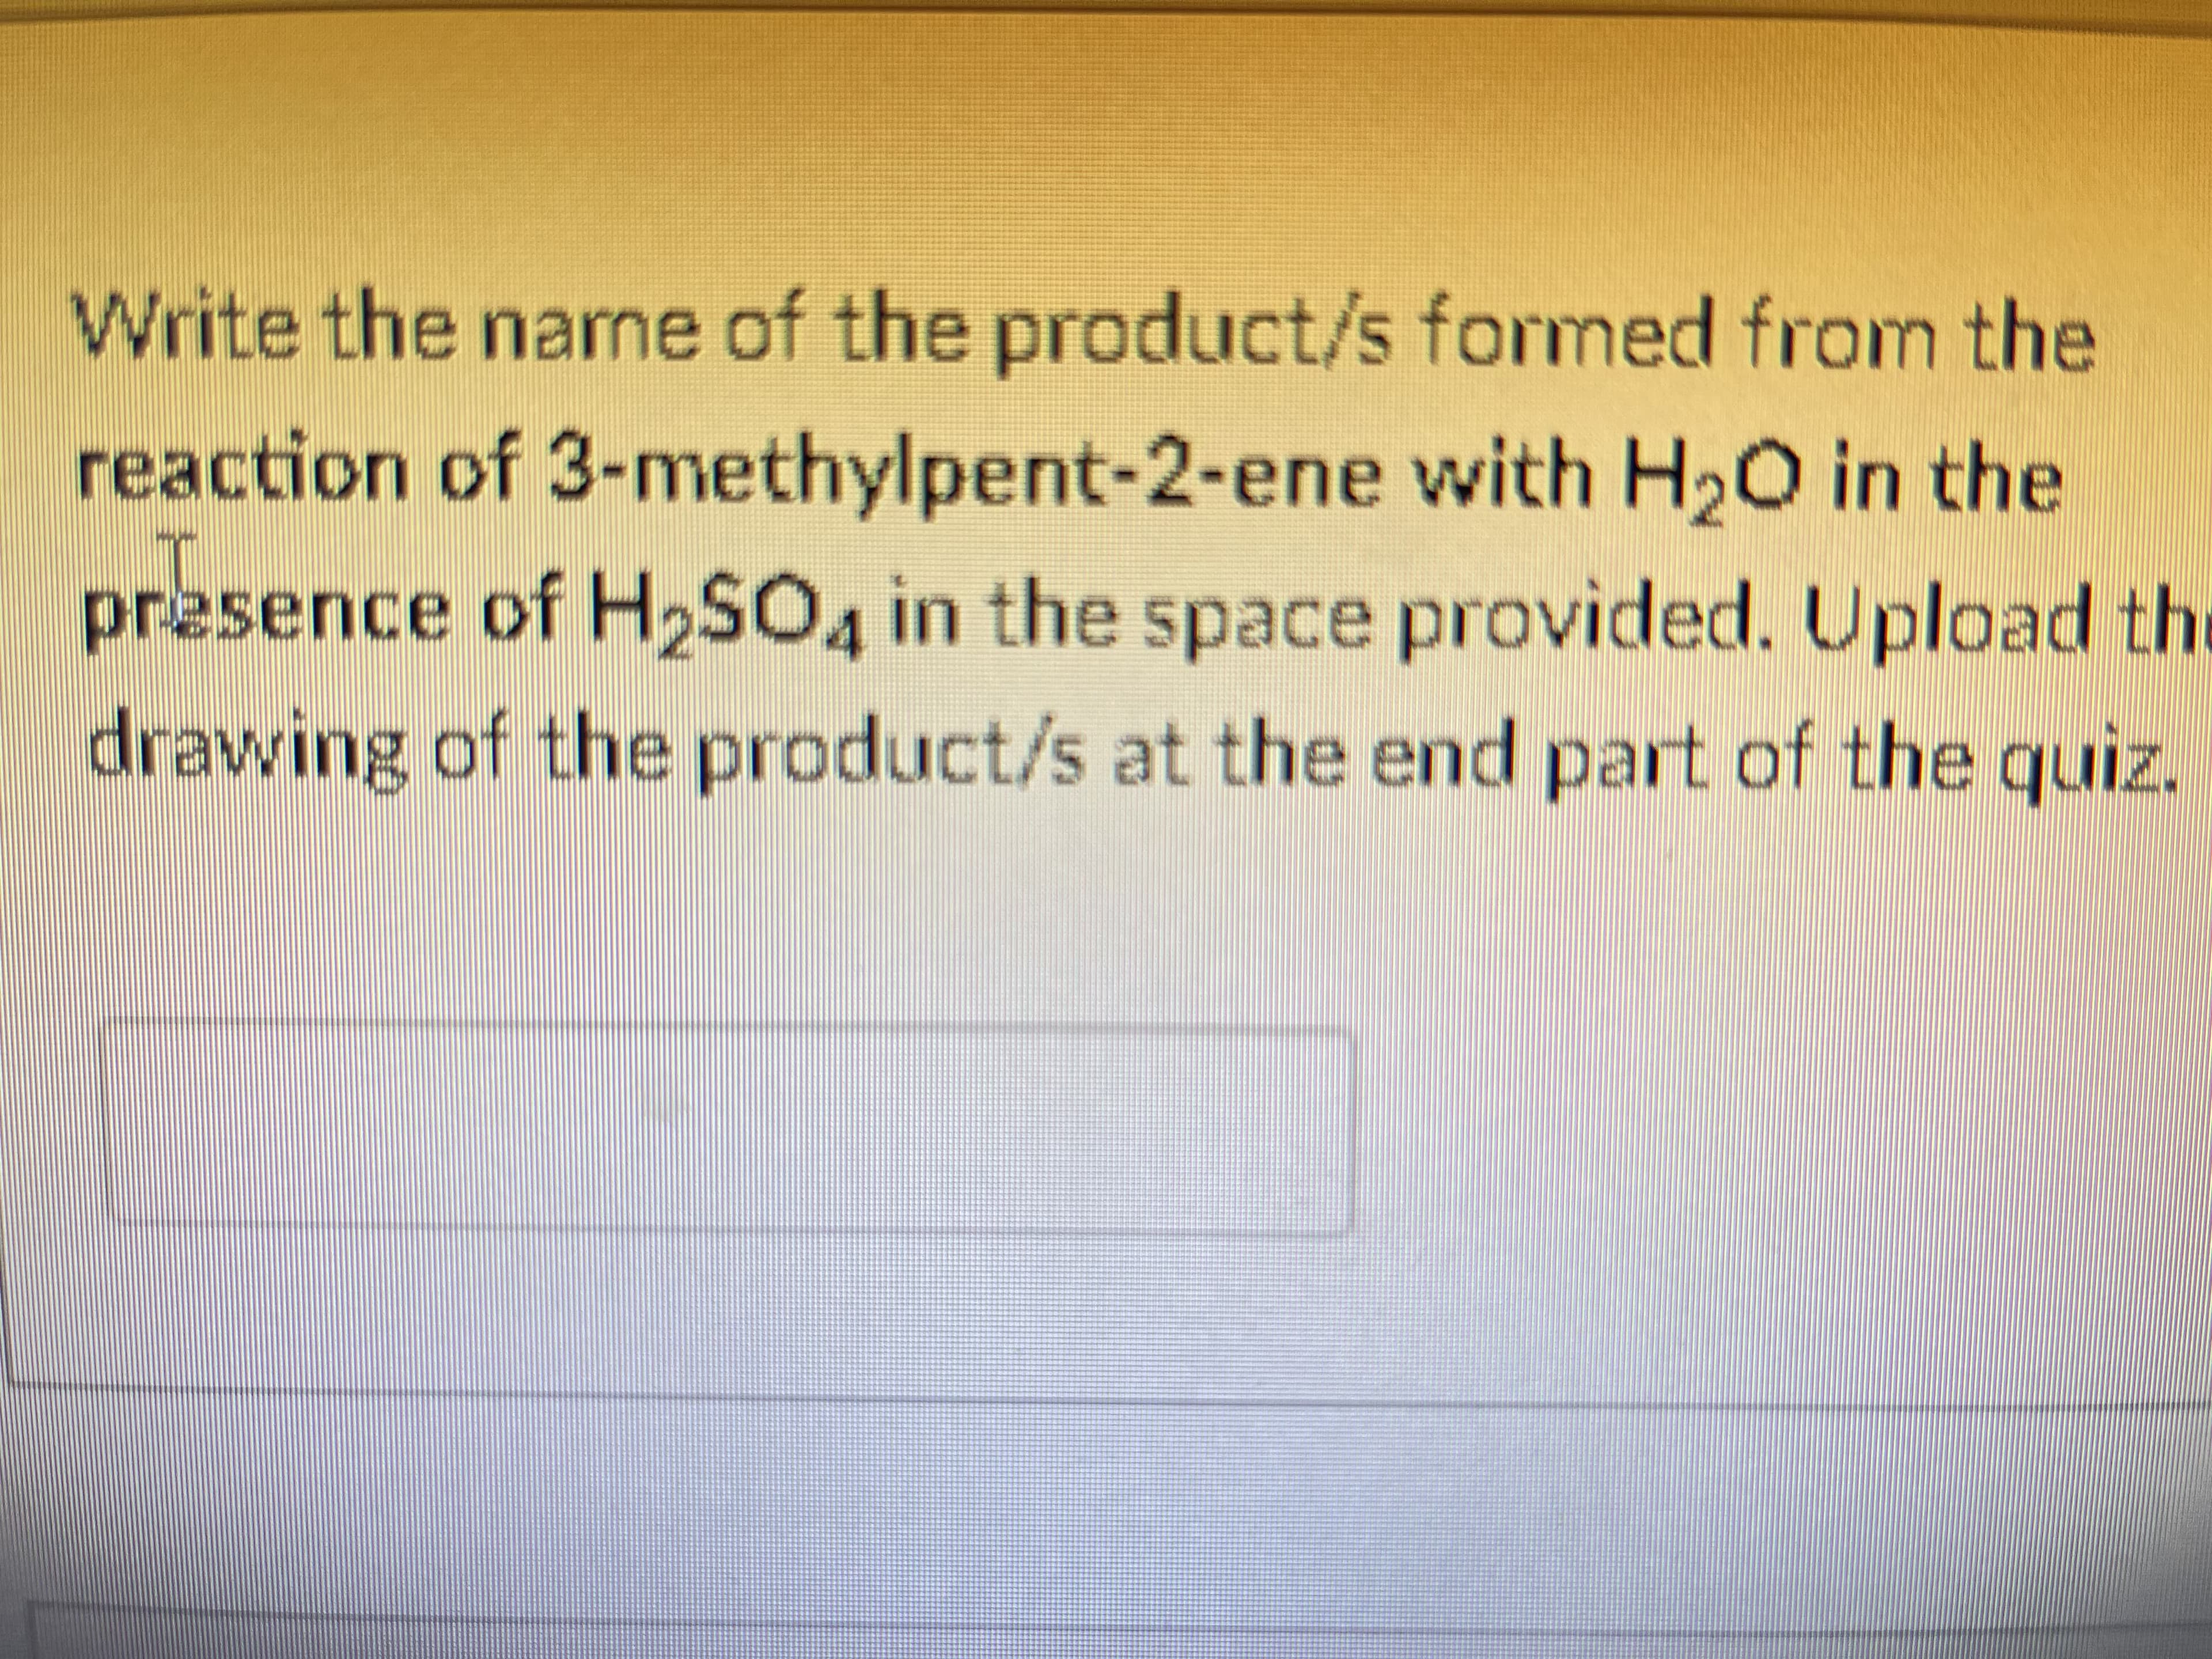 Write the name of the product/s formed from the
reaction of 3-methylpent-2-ene with H20 in the
presence of H2SO4 in the space provided. Upload the
drawing of the product/s at the end part of the quiz.
